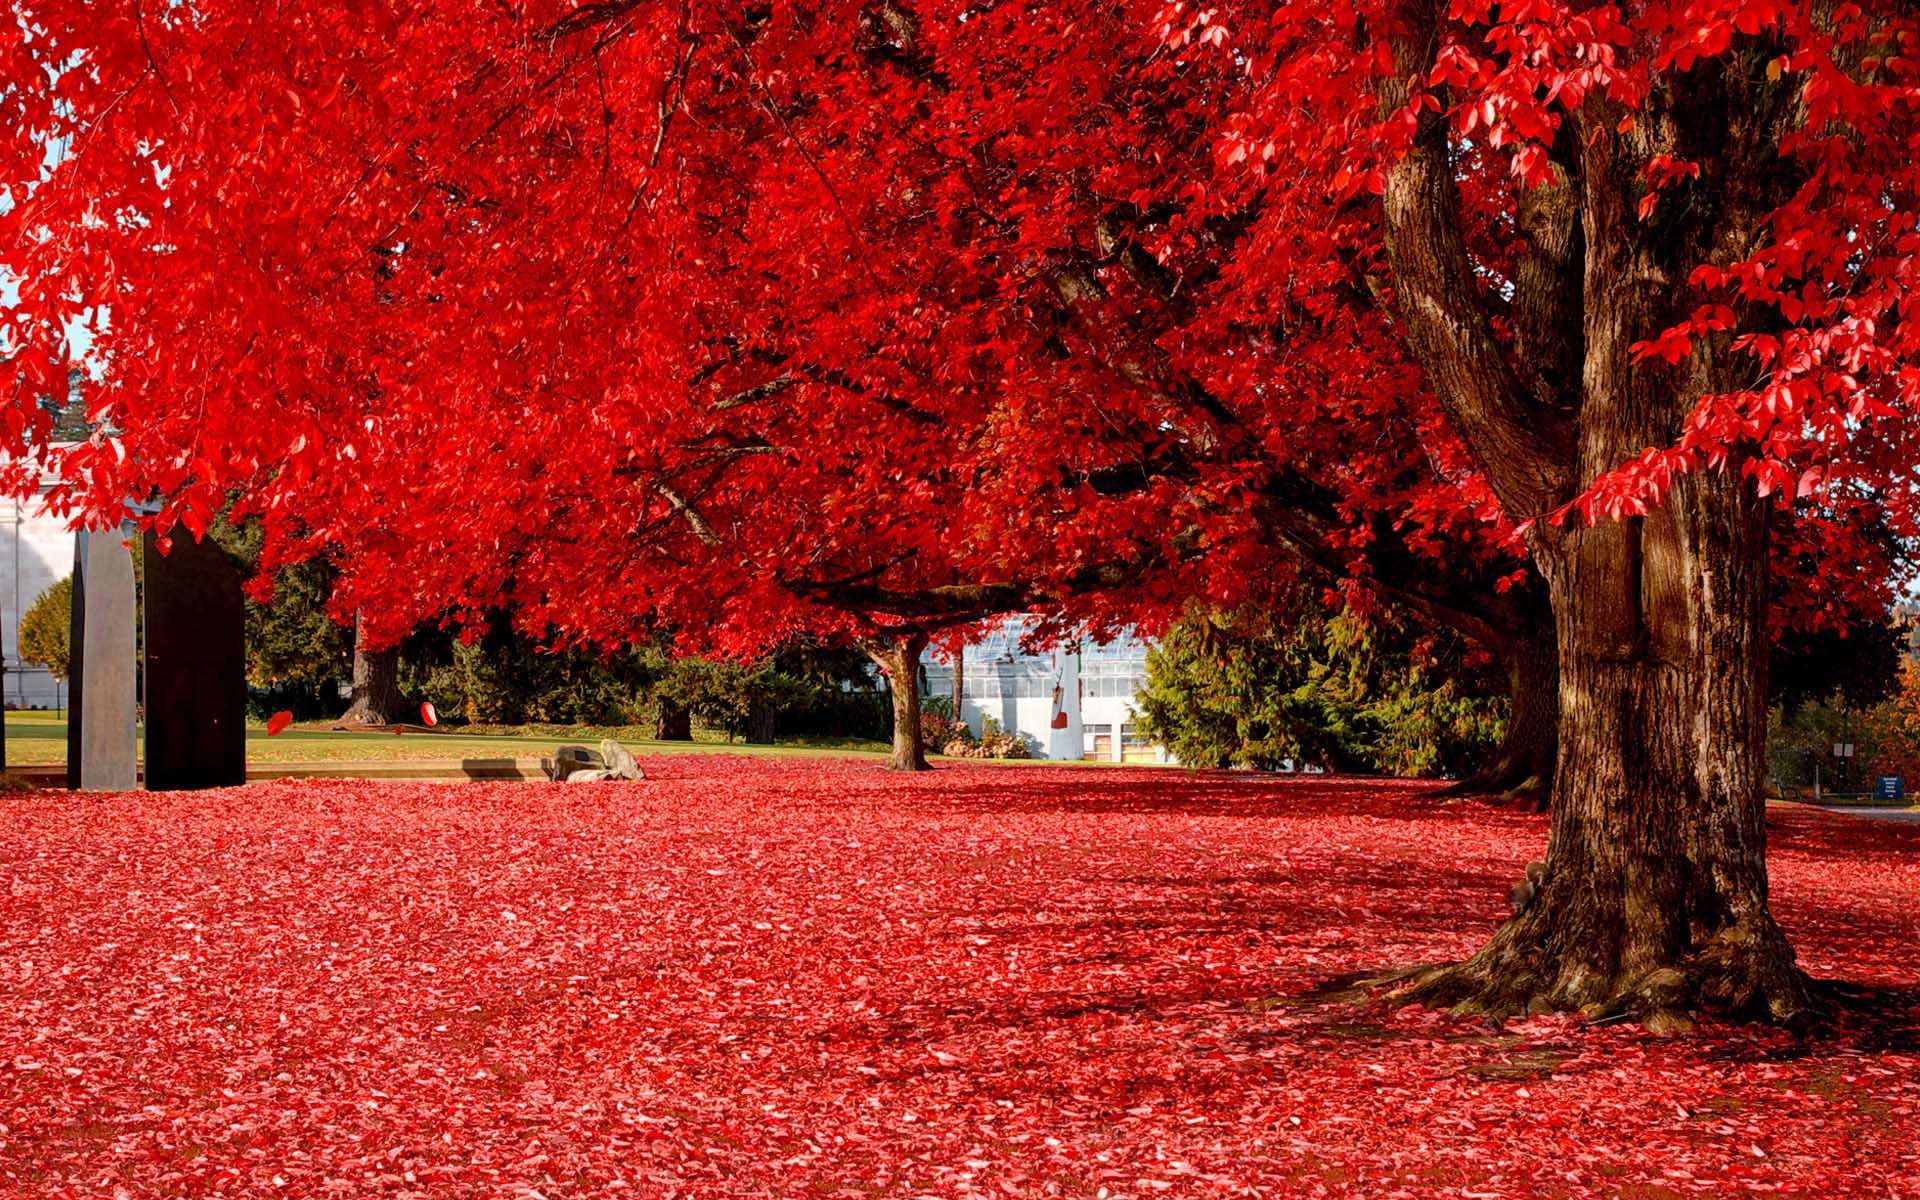 Amazing Red Tree | HD Nature Wallpapers for Mobile and Desktop